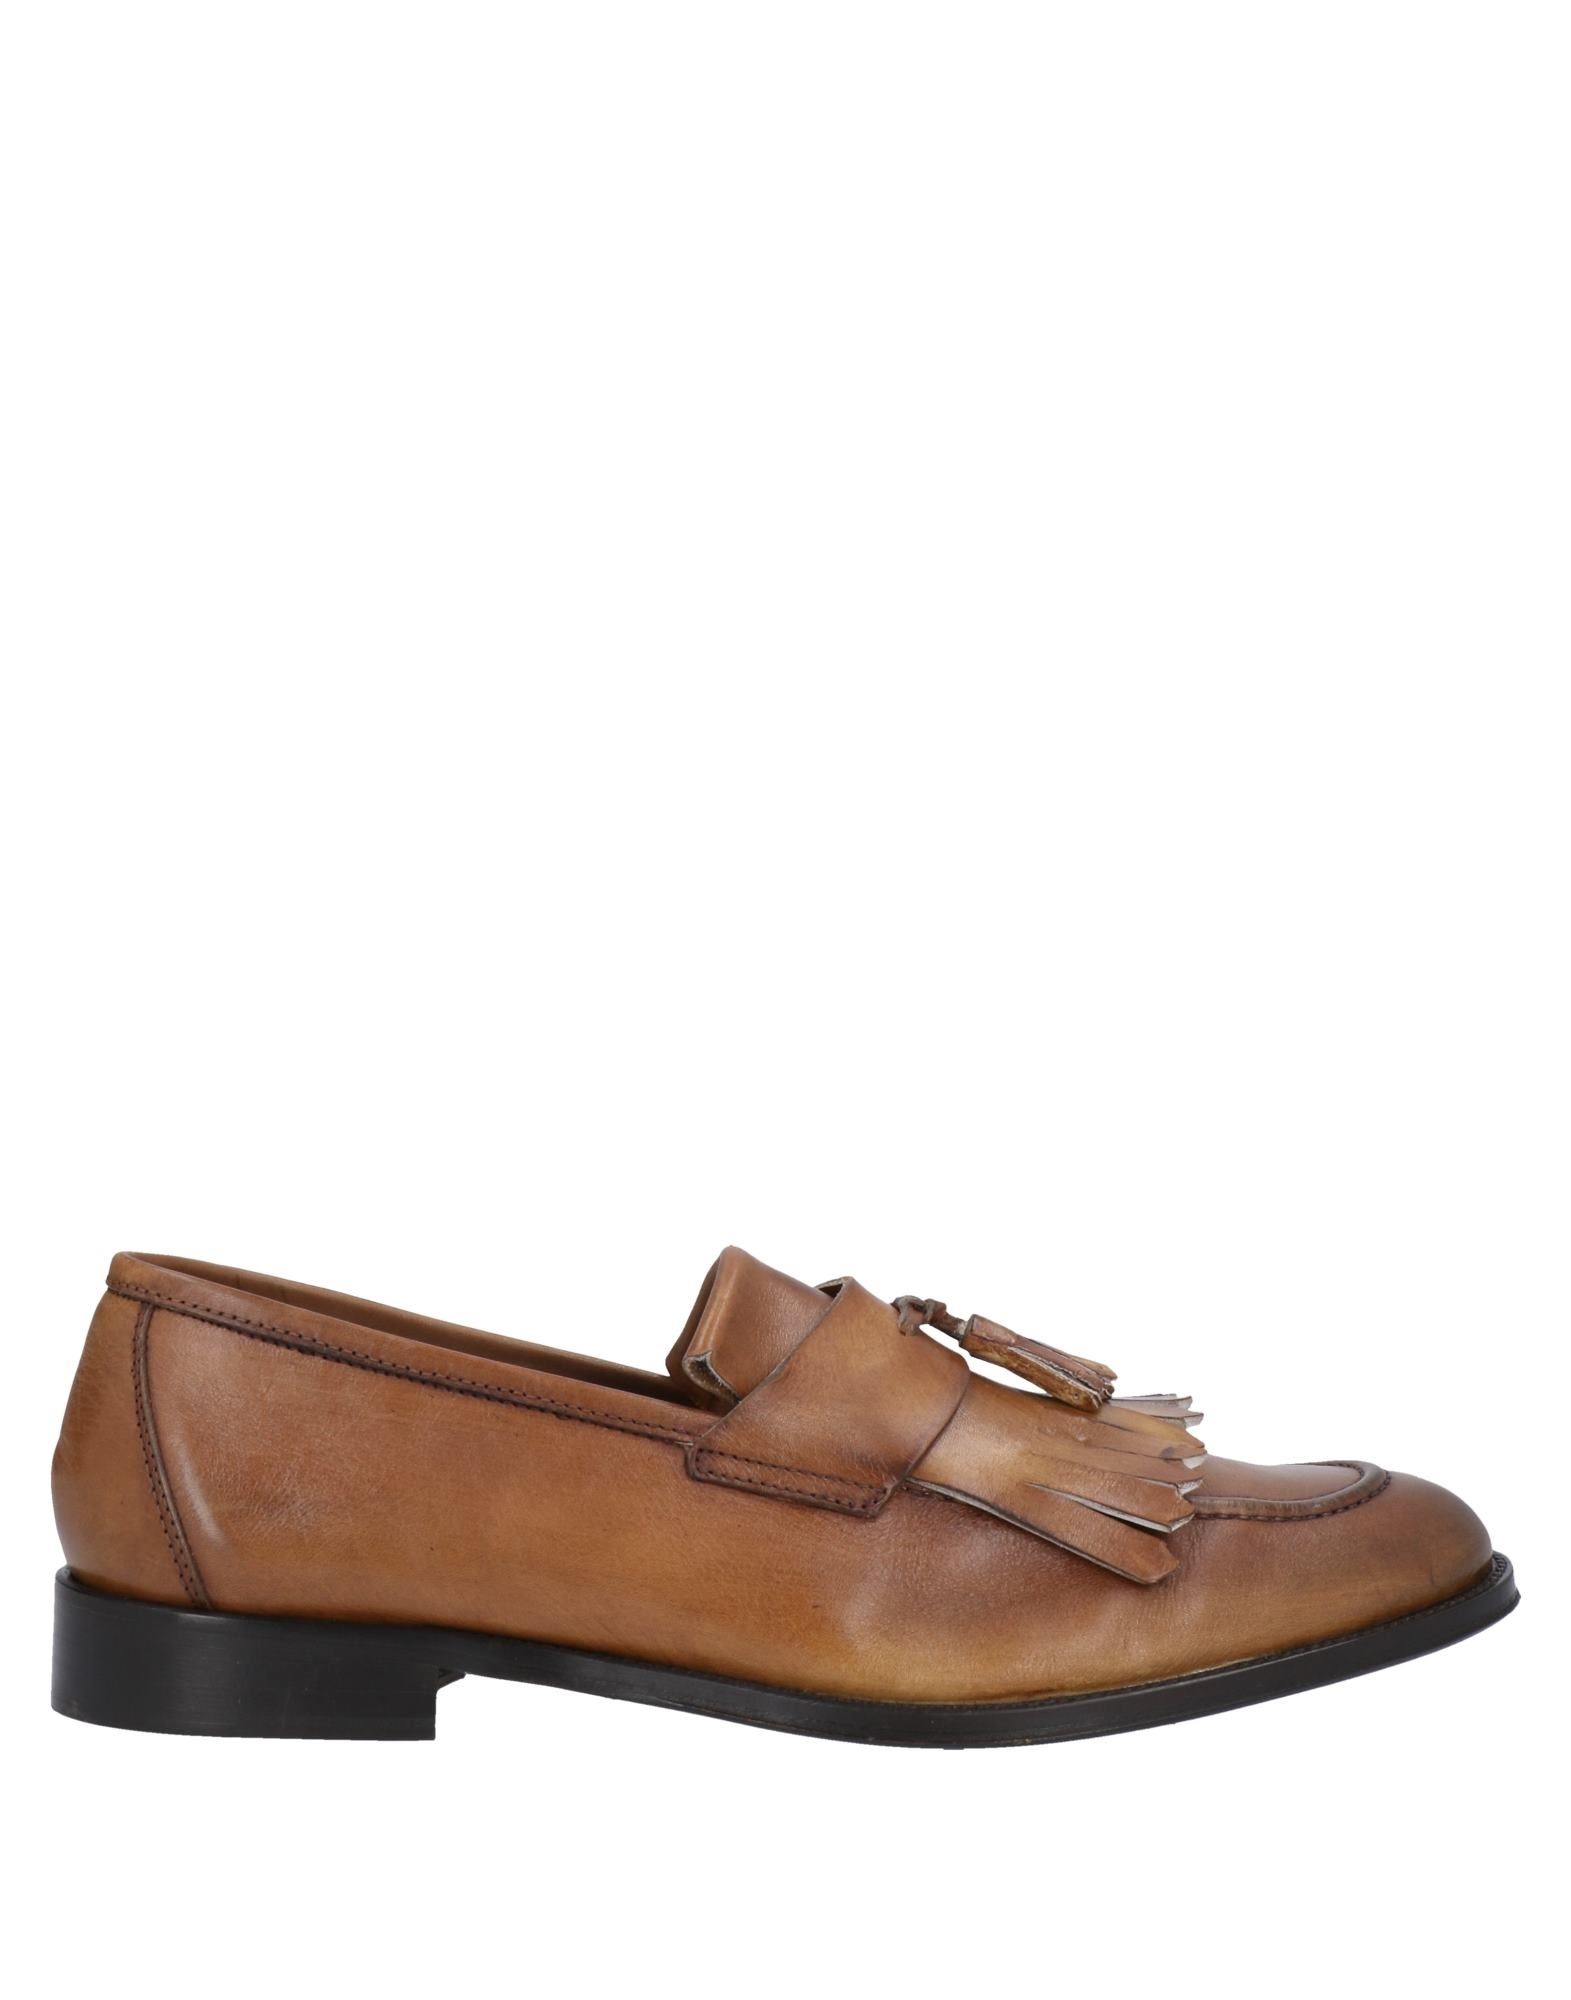 Alexander Trend Loafers In Tan